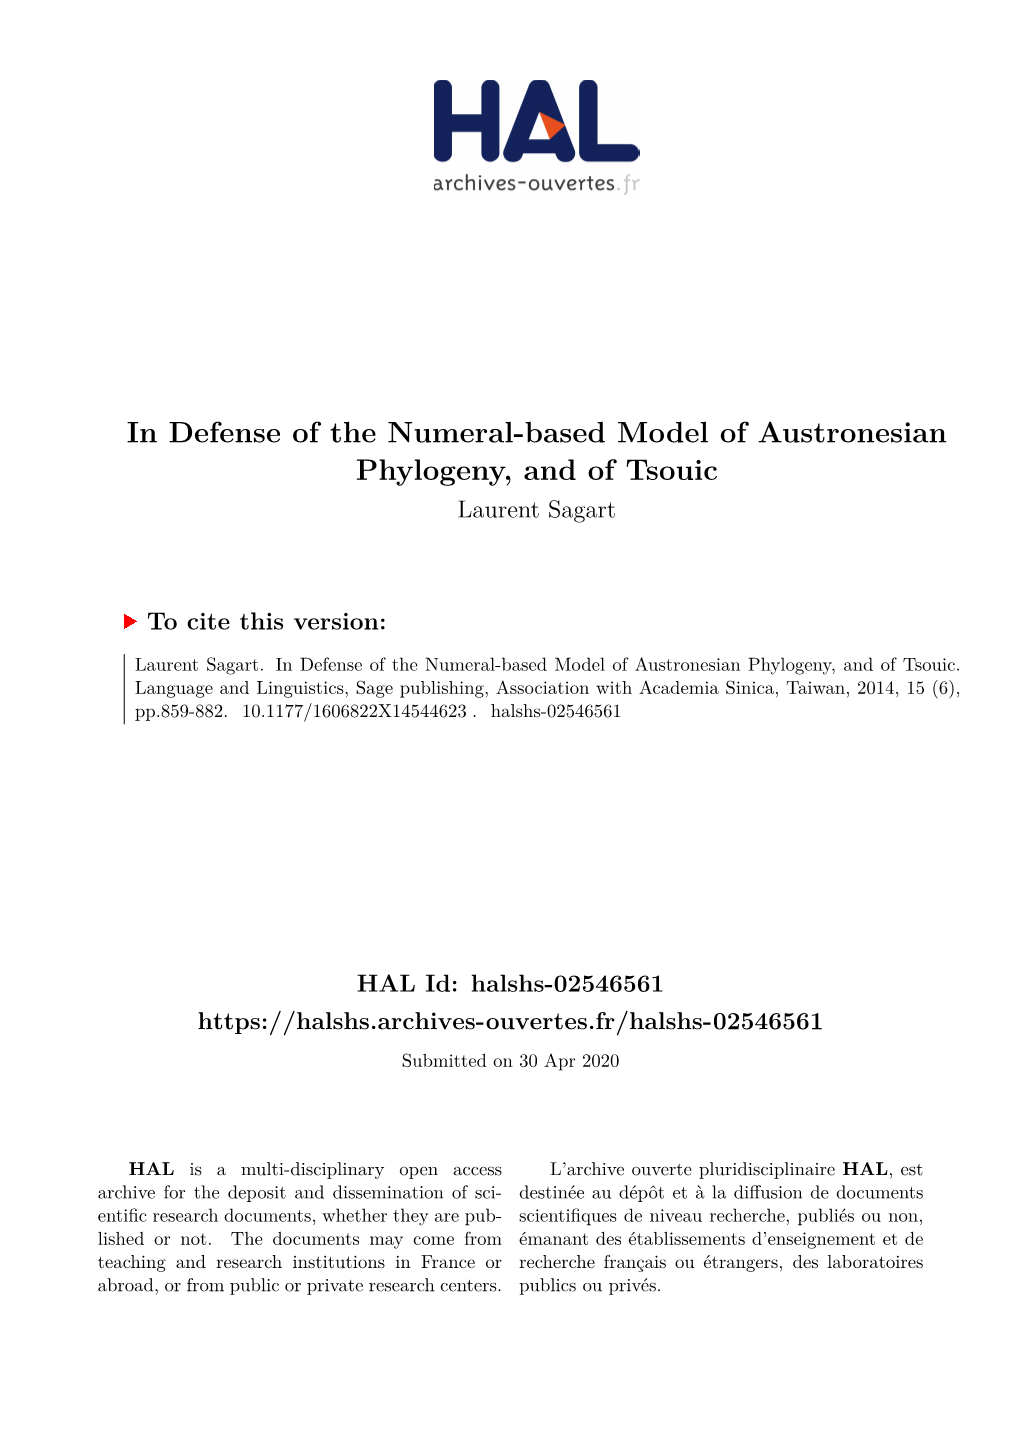 In Defense of the Numeral-Based Model of Austronesian Phylogeny, and of Tsouic Laurent Sagart